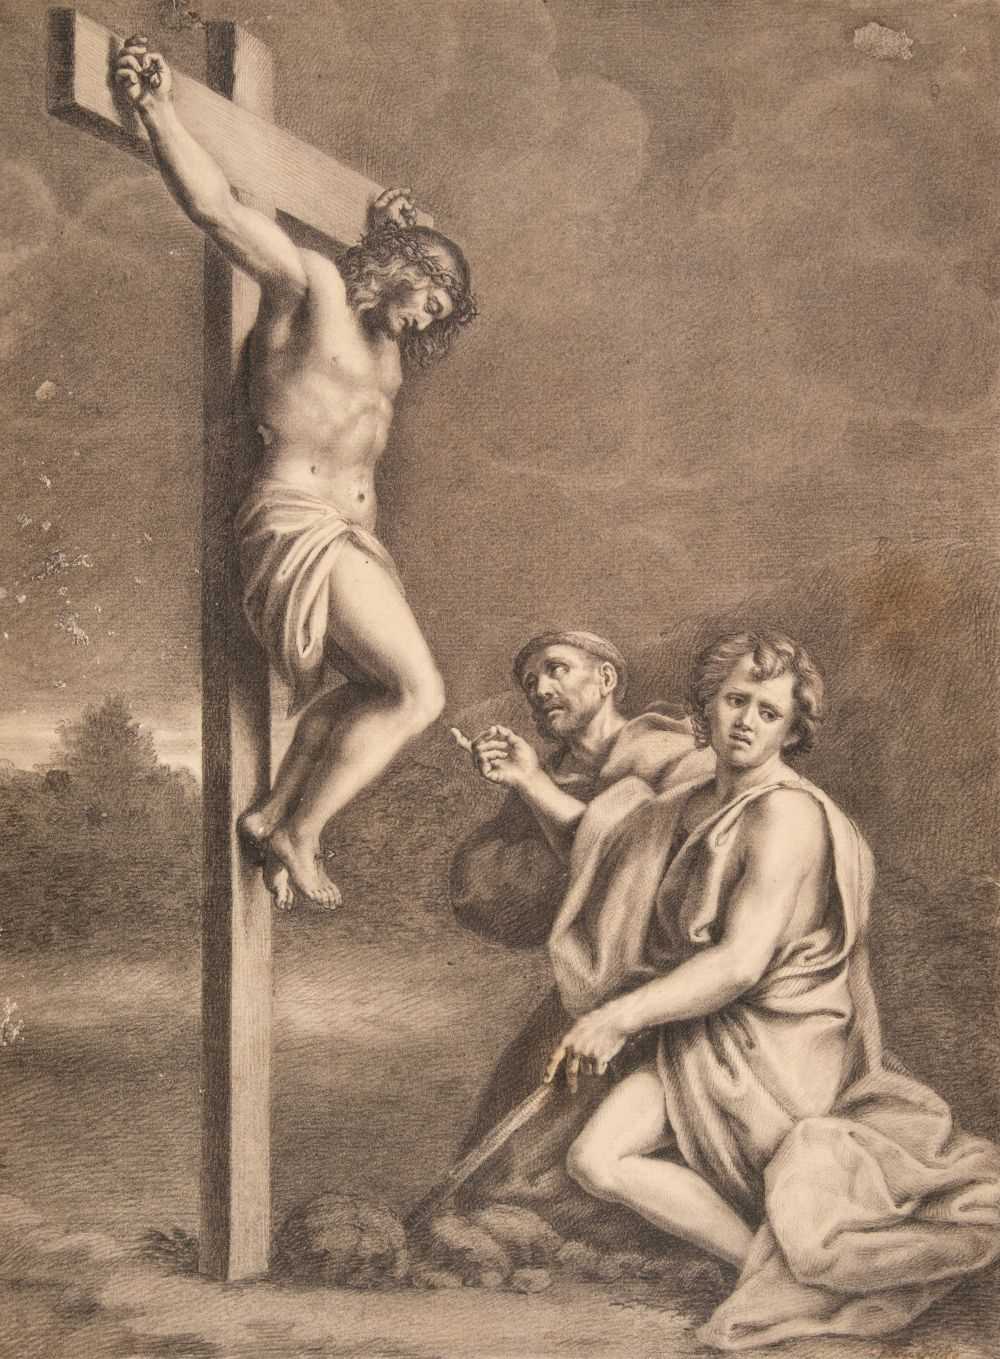 Lot 358 - English School. The Crucifixion, early 19th century